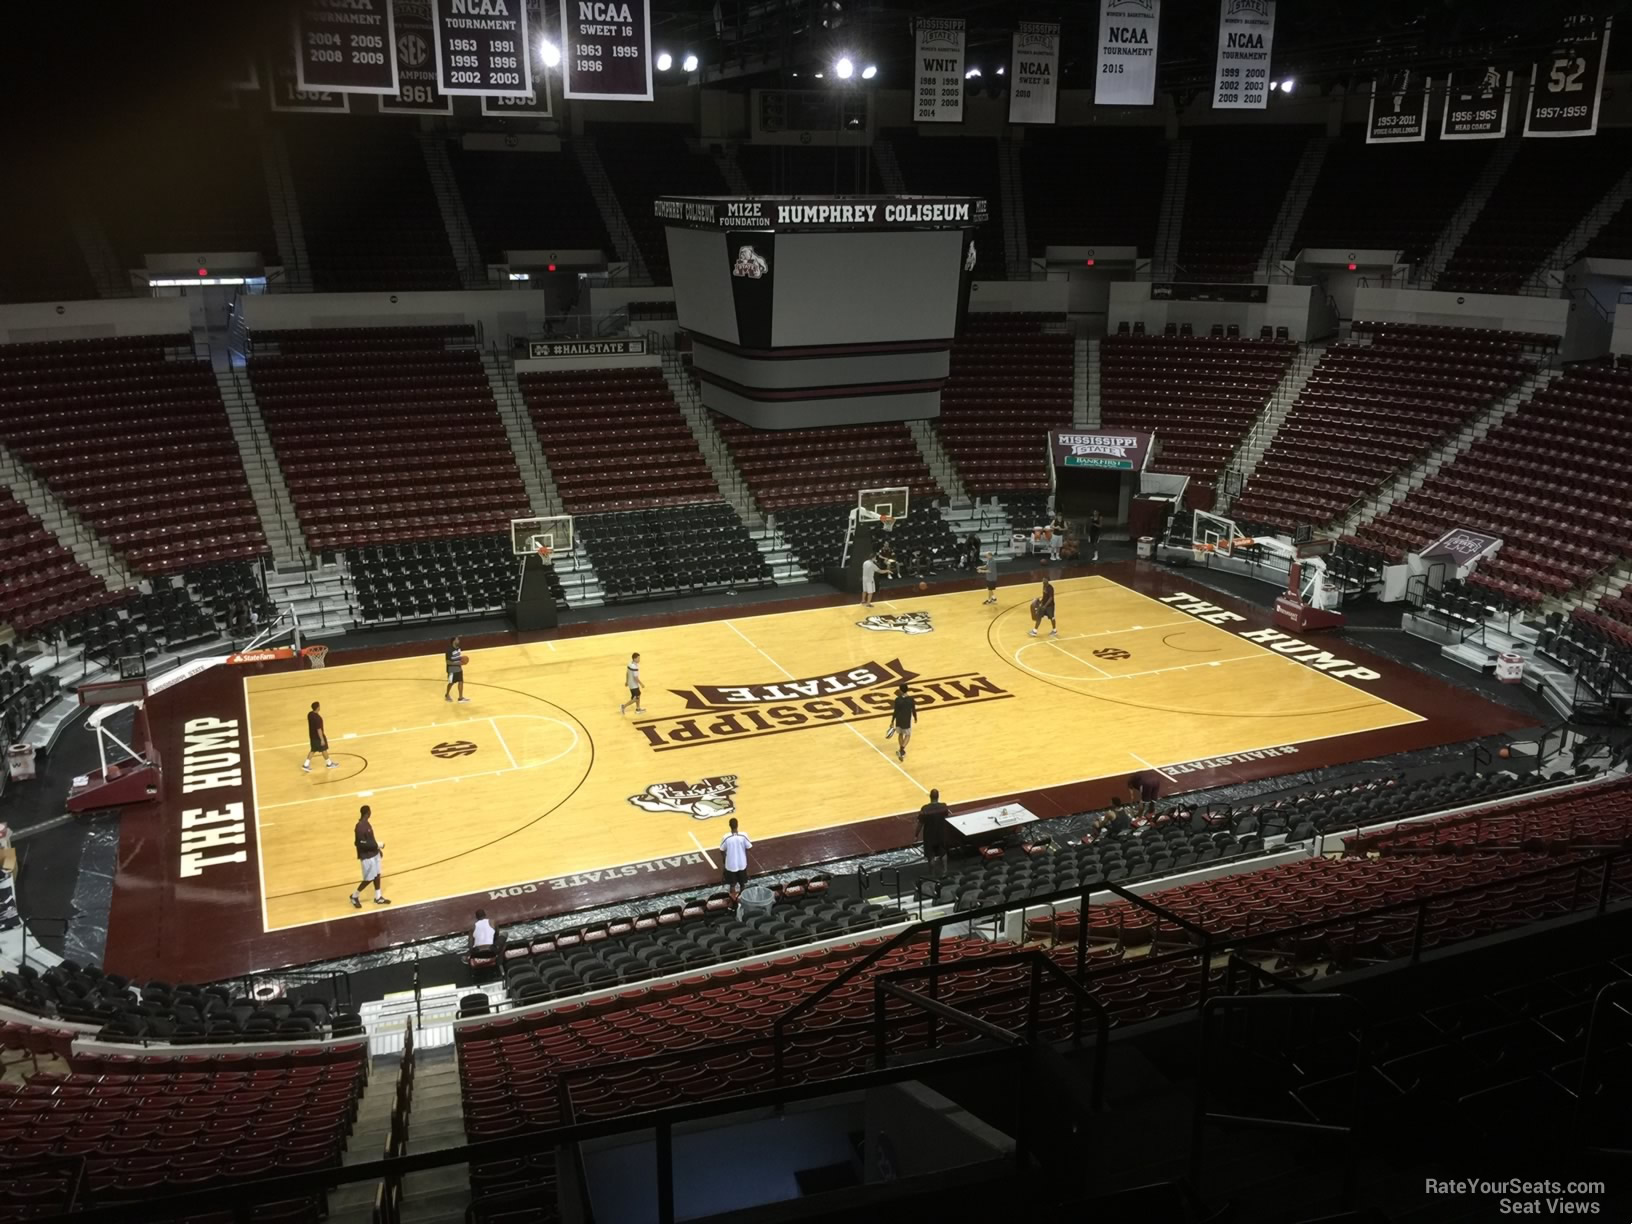 section 230, row 8 seat view  - humphrey coliseum